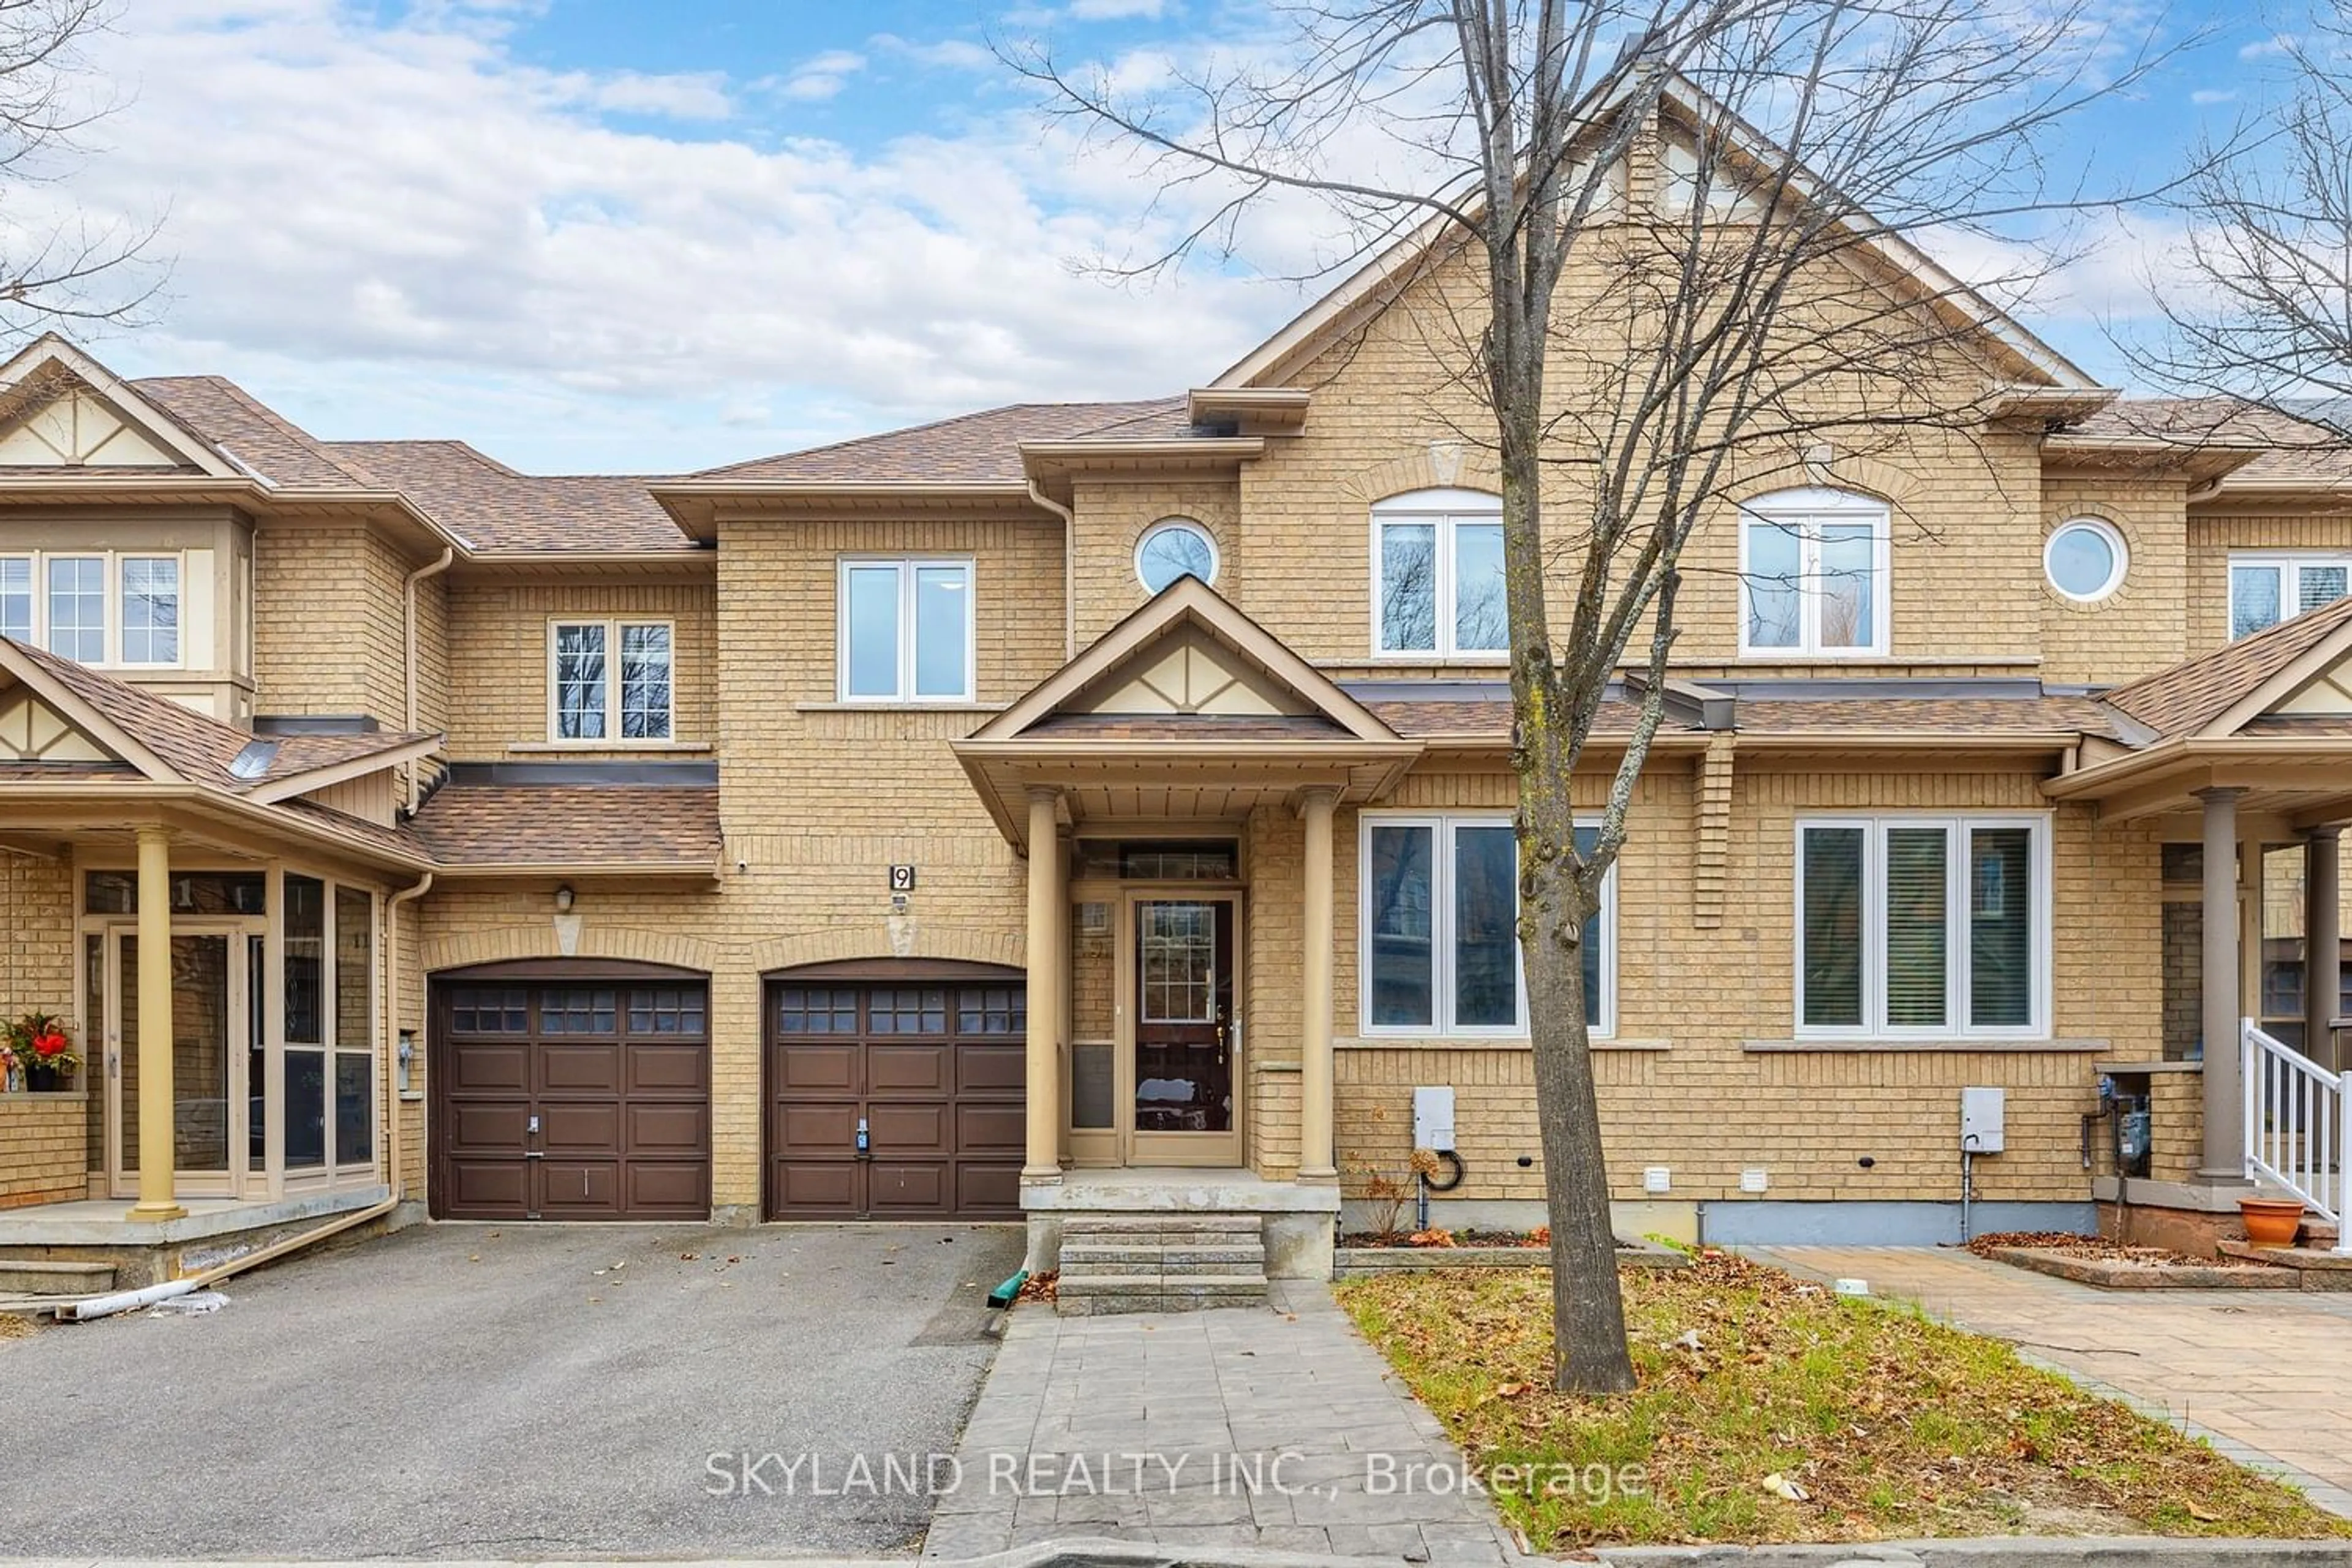 Home with brick exterior material for 9 Magnotta Rd, Markham Ontario L6C 2V5